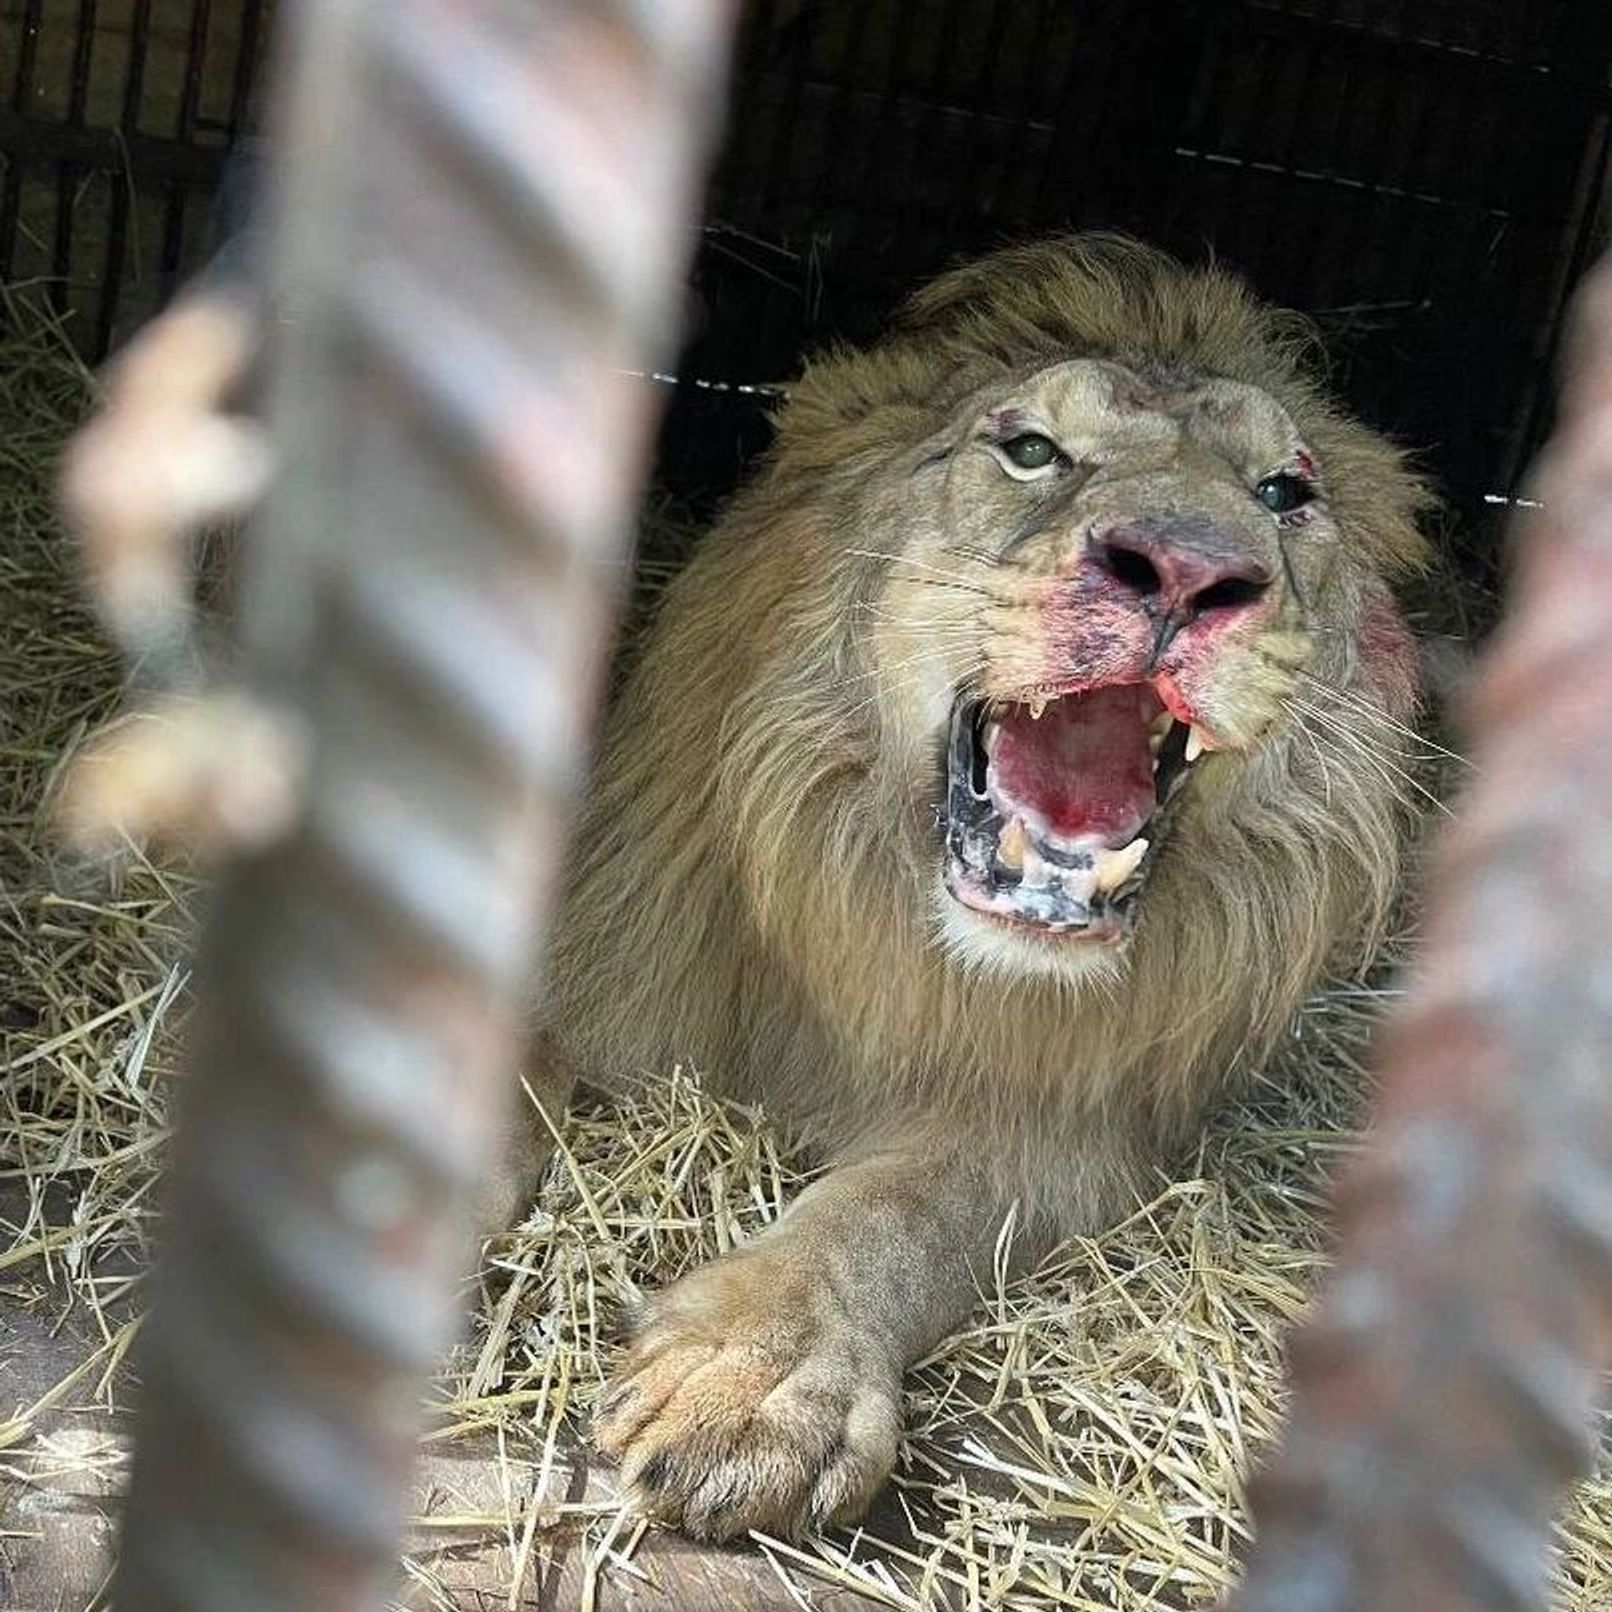 Pretzel the lion at the Natalia Popova Center. During the shelling in Kyiv, he was very frightened and beat himself against the cage